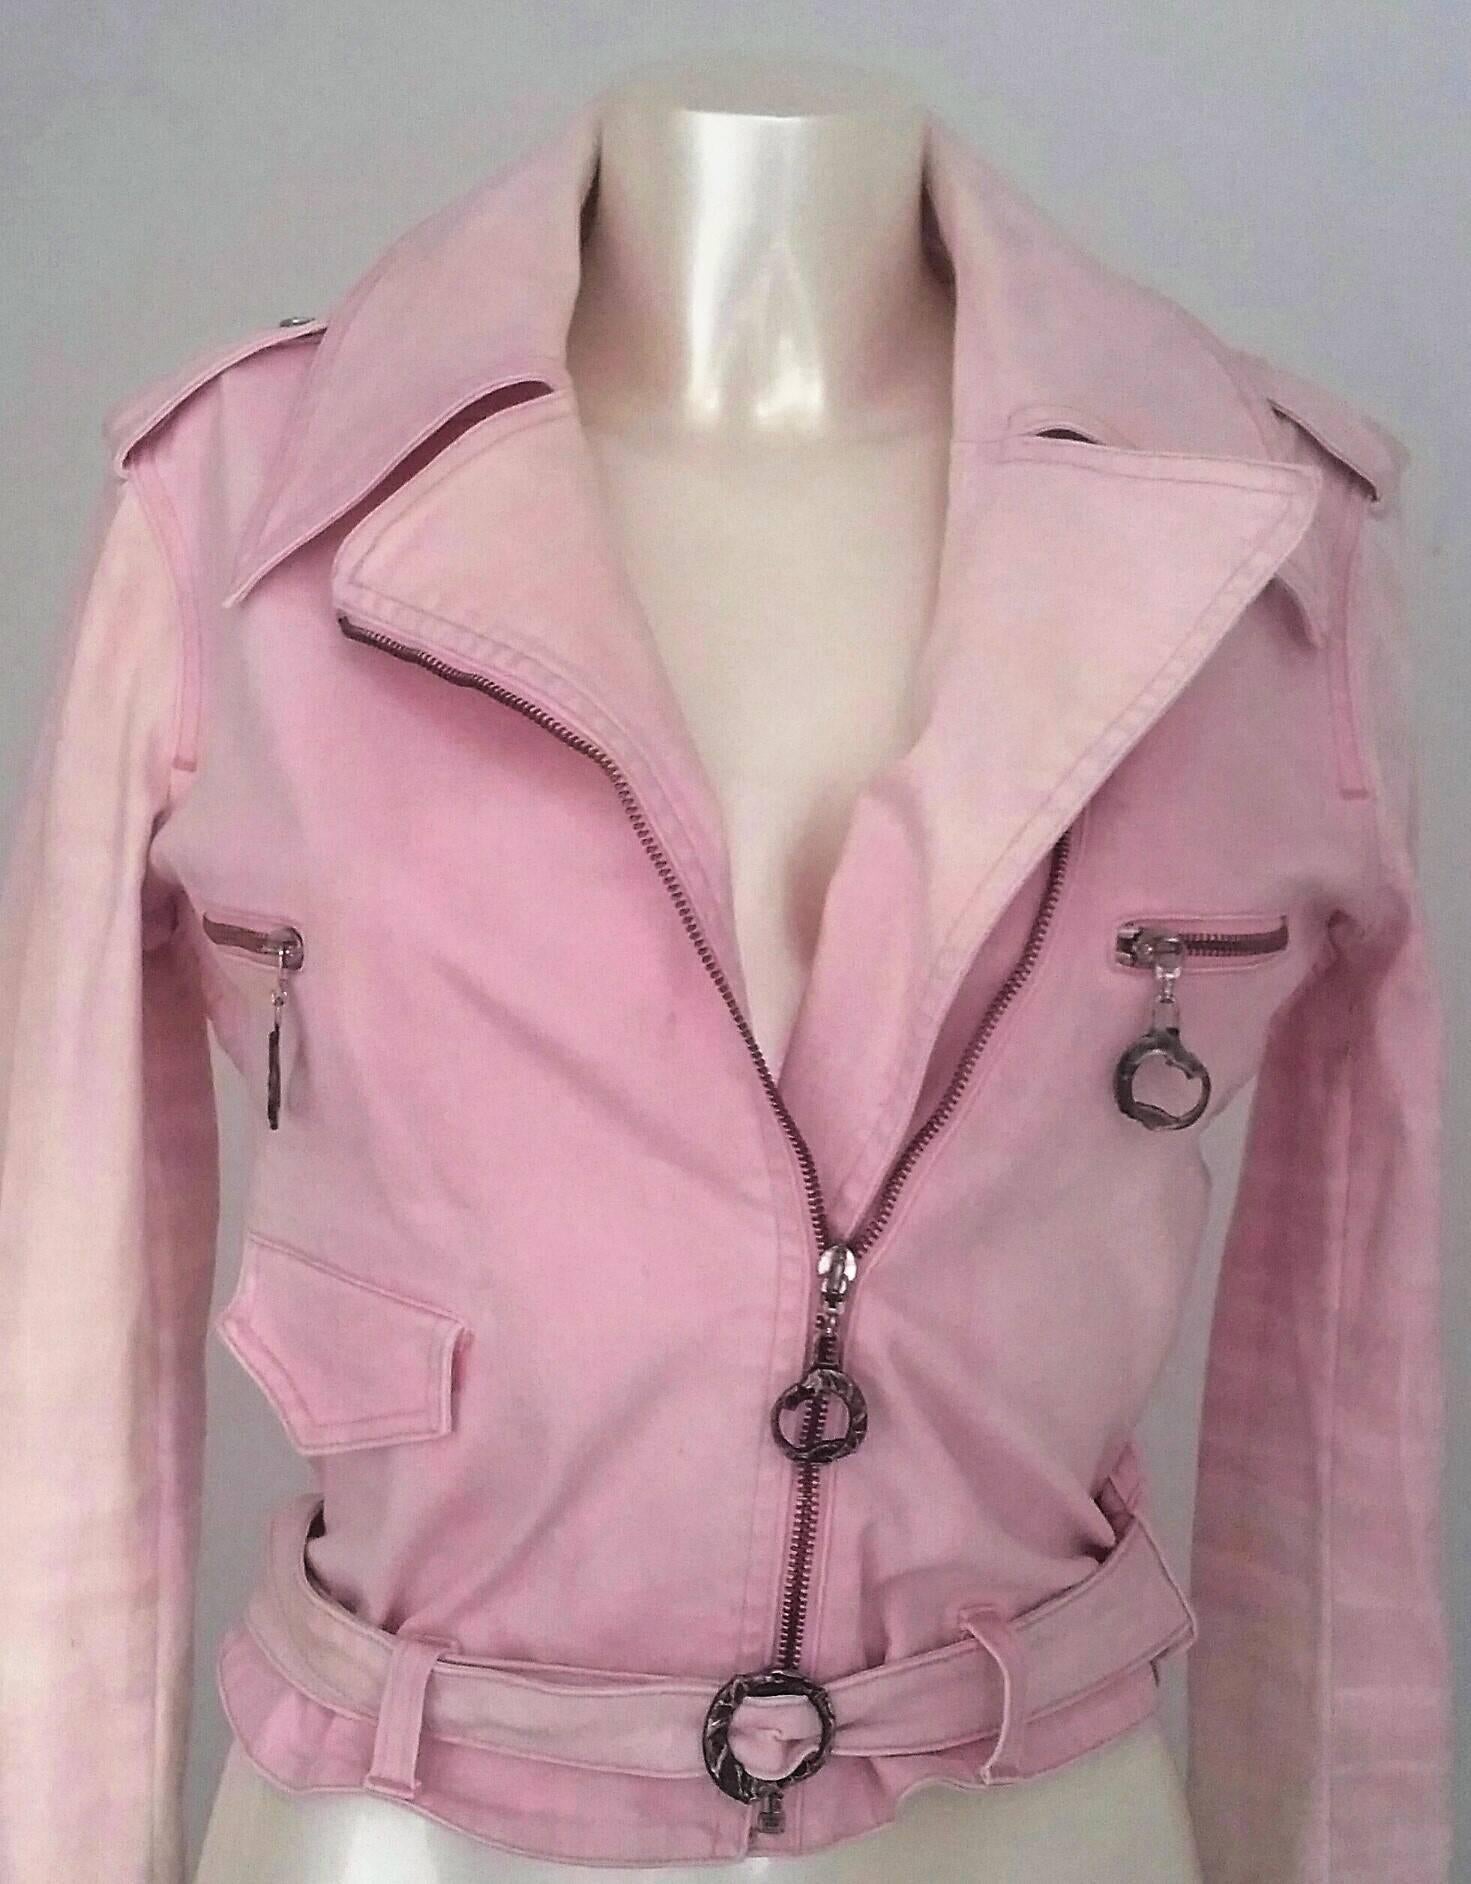 1990s Roberto Cavalli pink denim jacket

Made in italy

Size: Small

Composition: 98 cotton 2 other

Lining: 65 polyestere 35 cotton